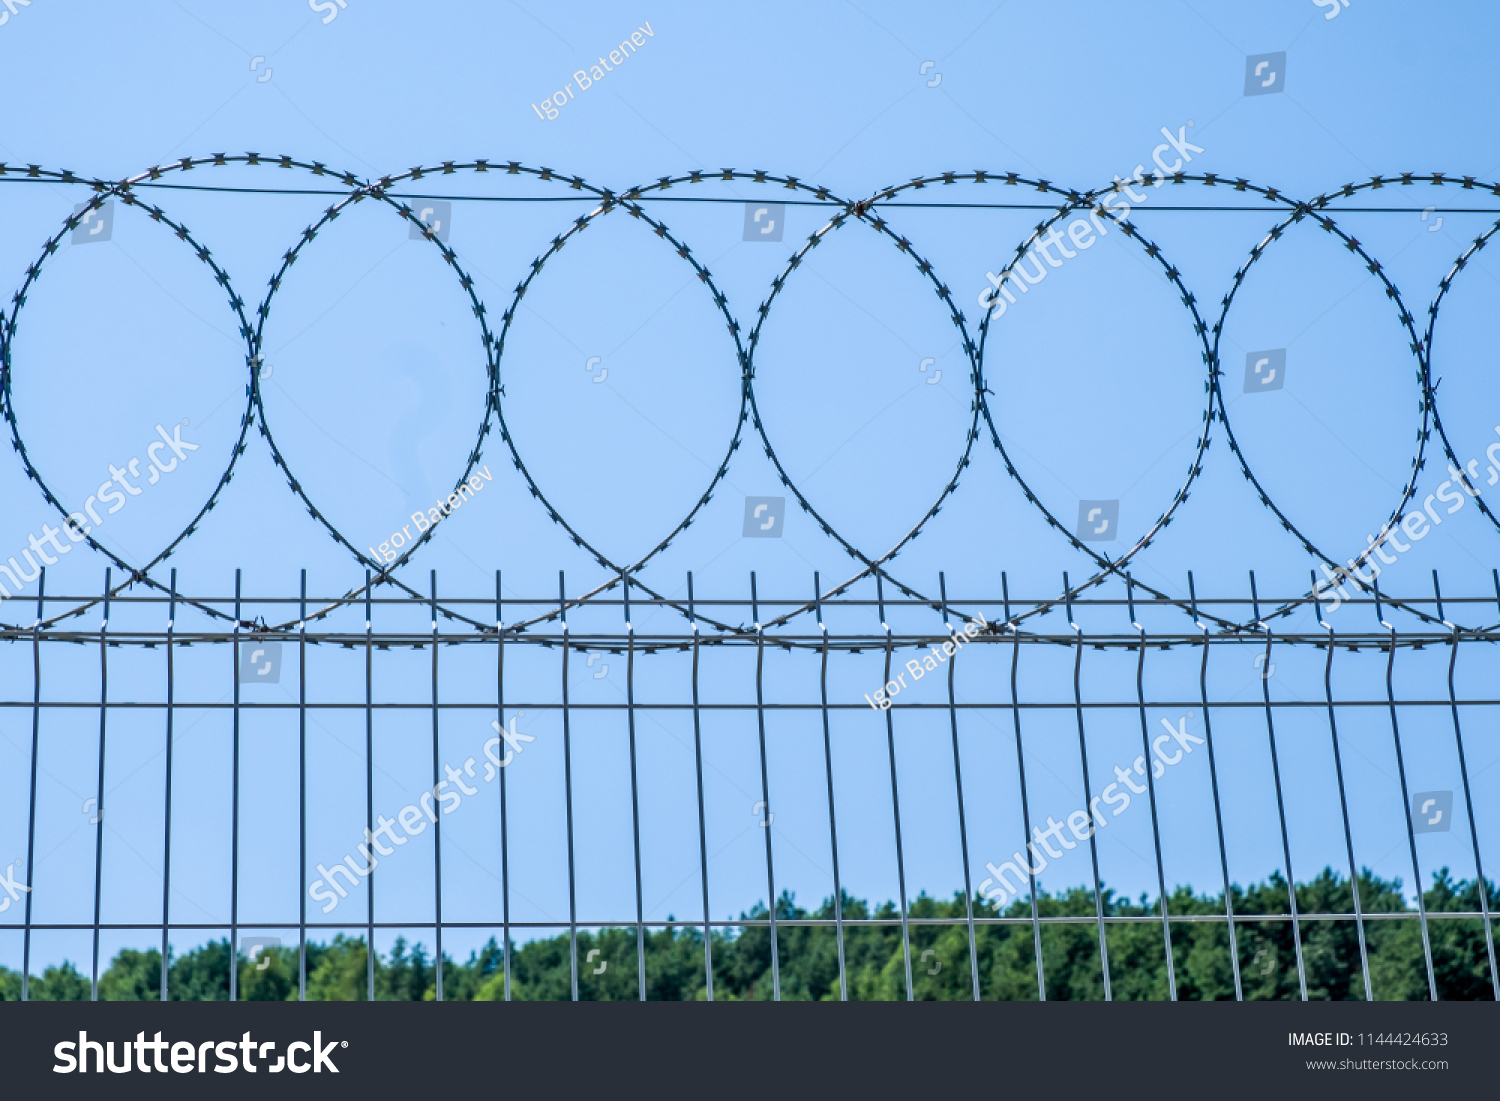 Barbed wire on a wire fence. #1144424633